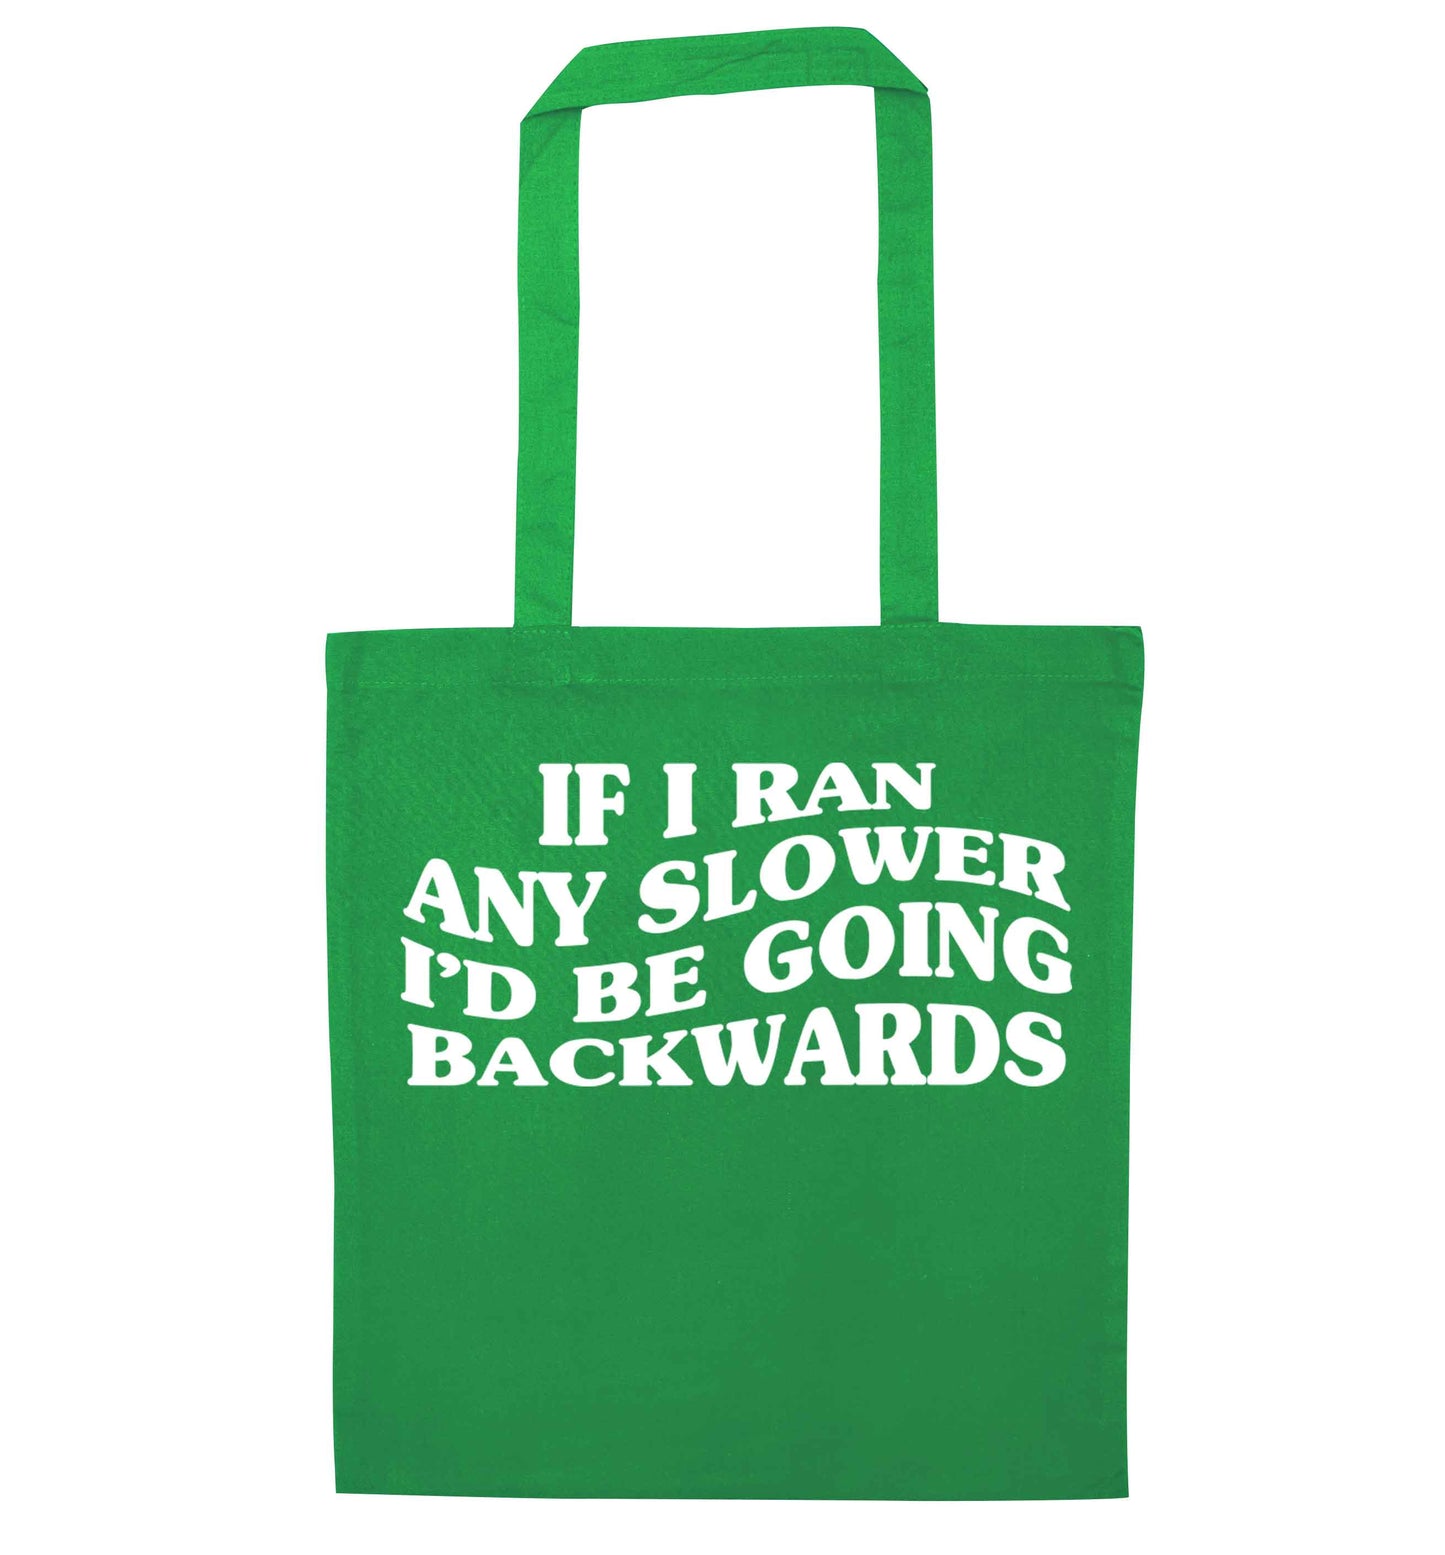 If I ran any slower I'd be going backwards green tote bag